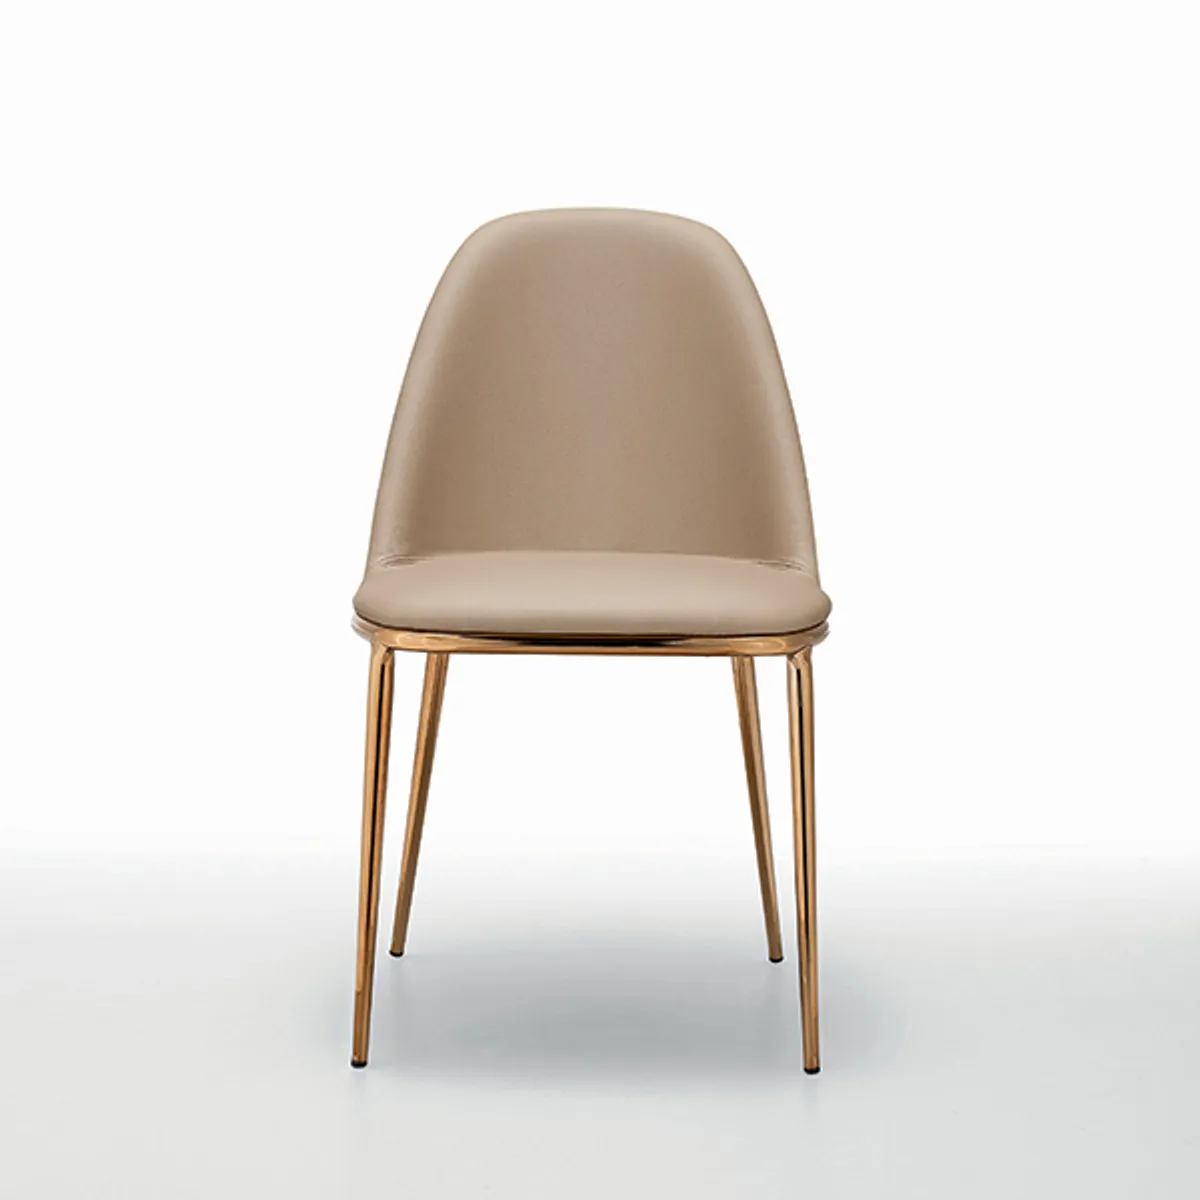 Lea Side Chair Metal Frame Inside Out Contracts